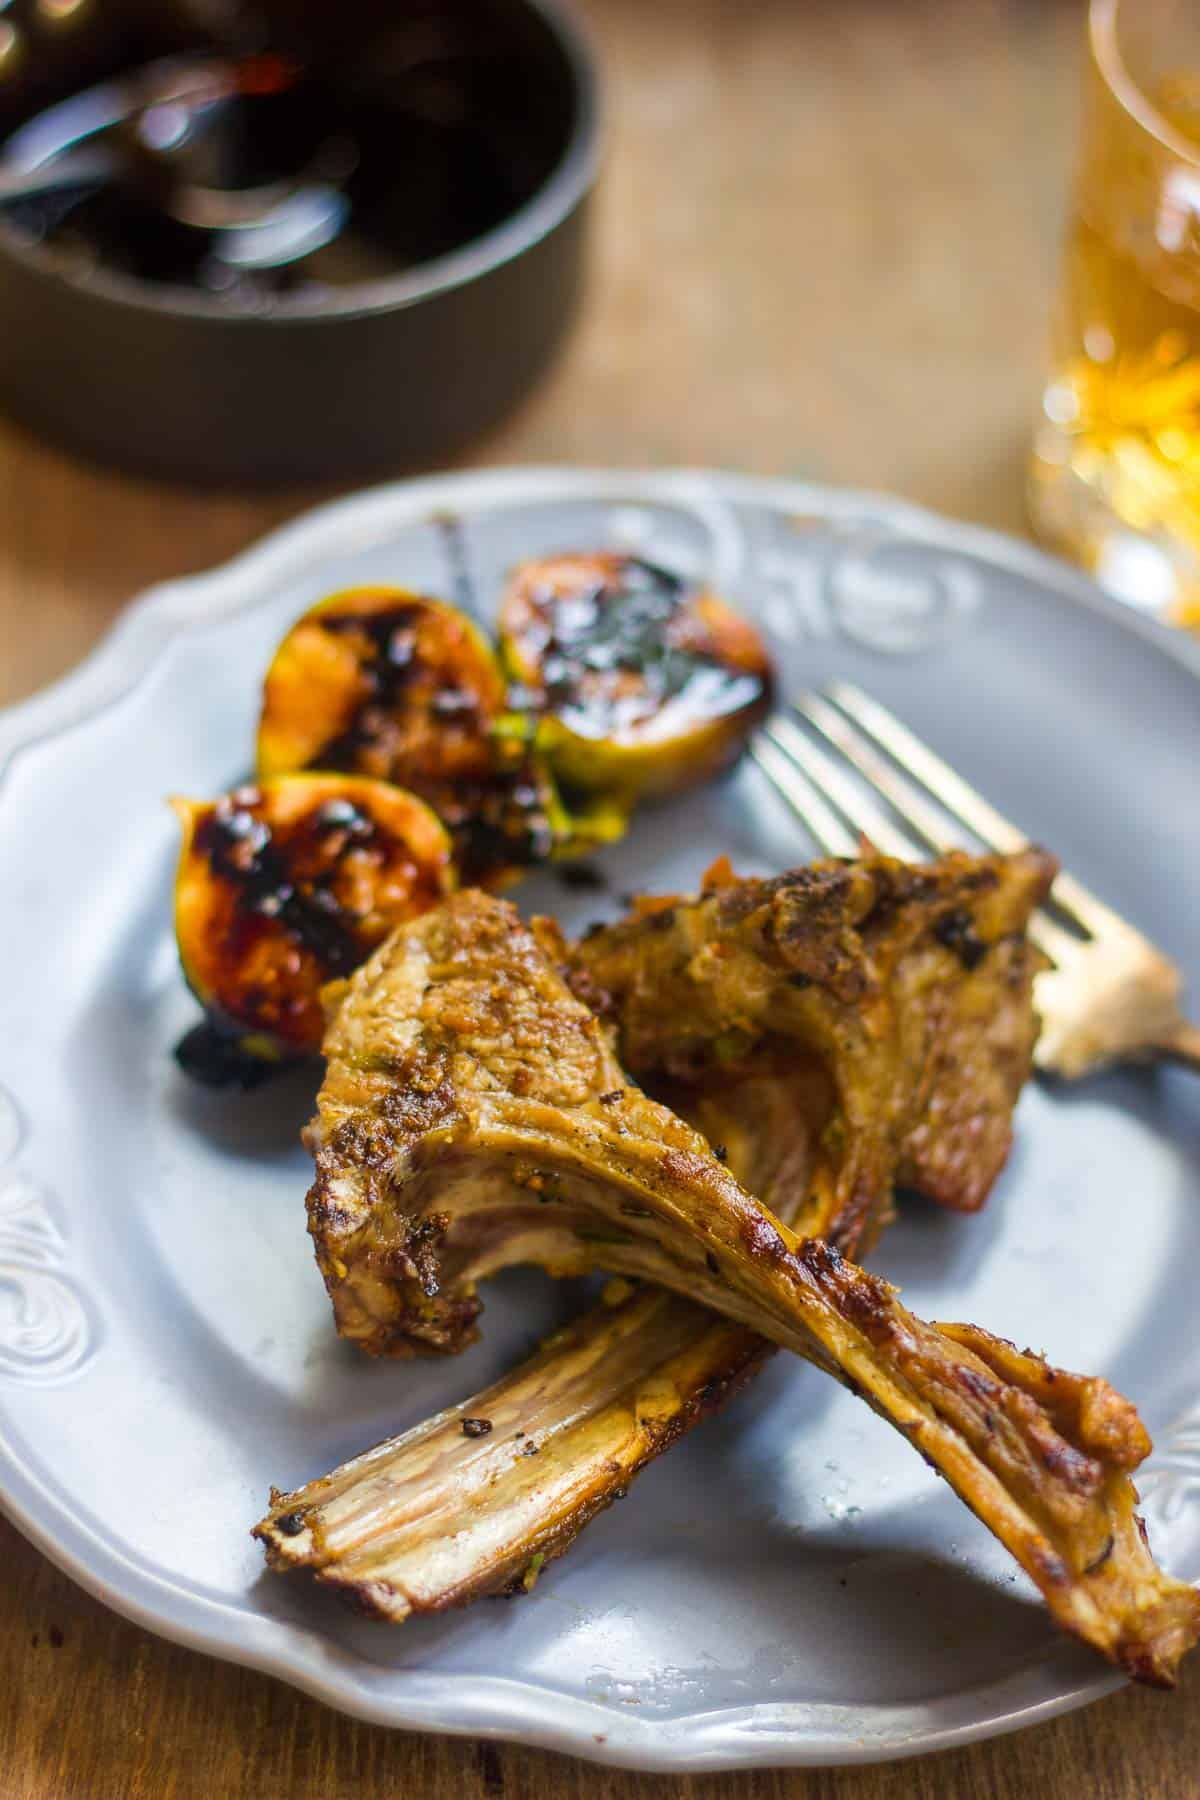 Spiced lamb chops served with figs and balsamic reduction on a blue plate.